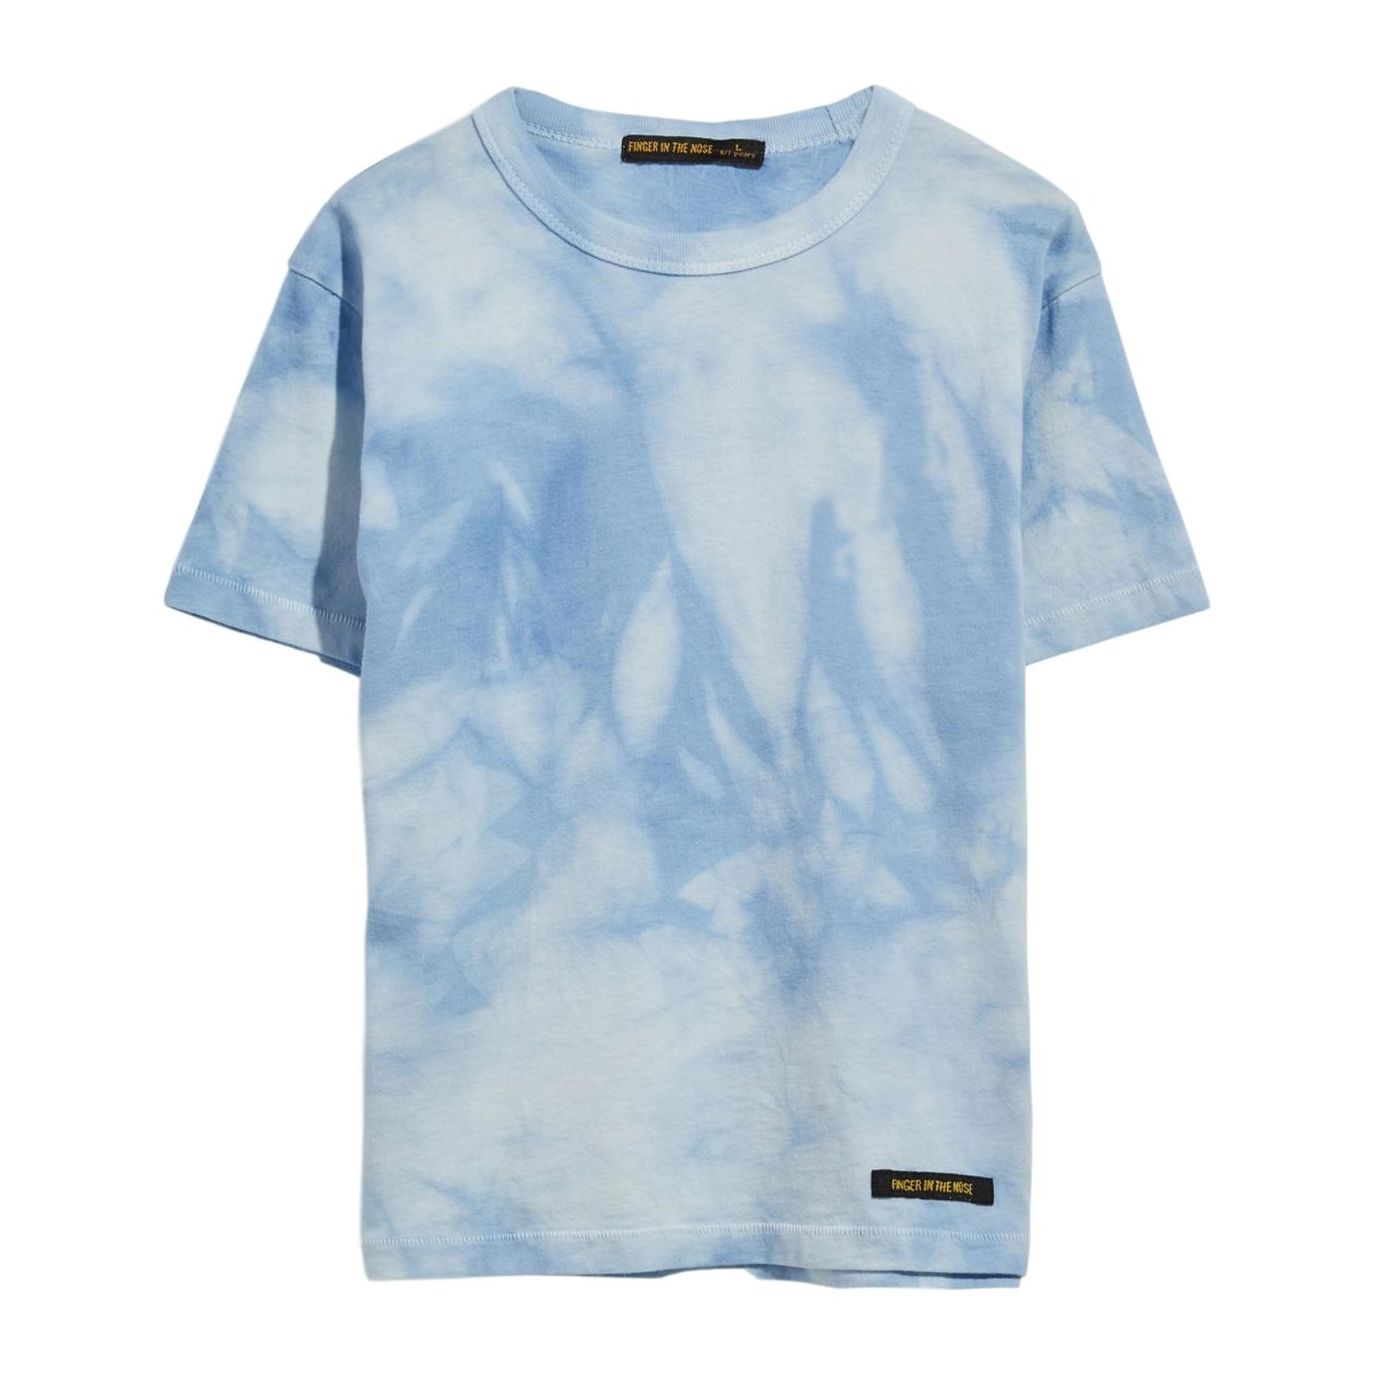 Finger in the nose - T-shirt KID Pale Blue Tie Blue - シャツ＆Tシャツ - 202-1061-265TD 